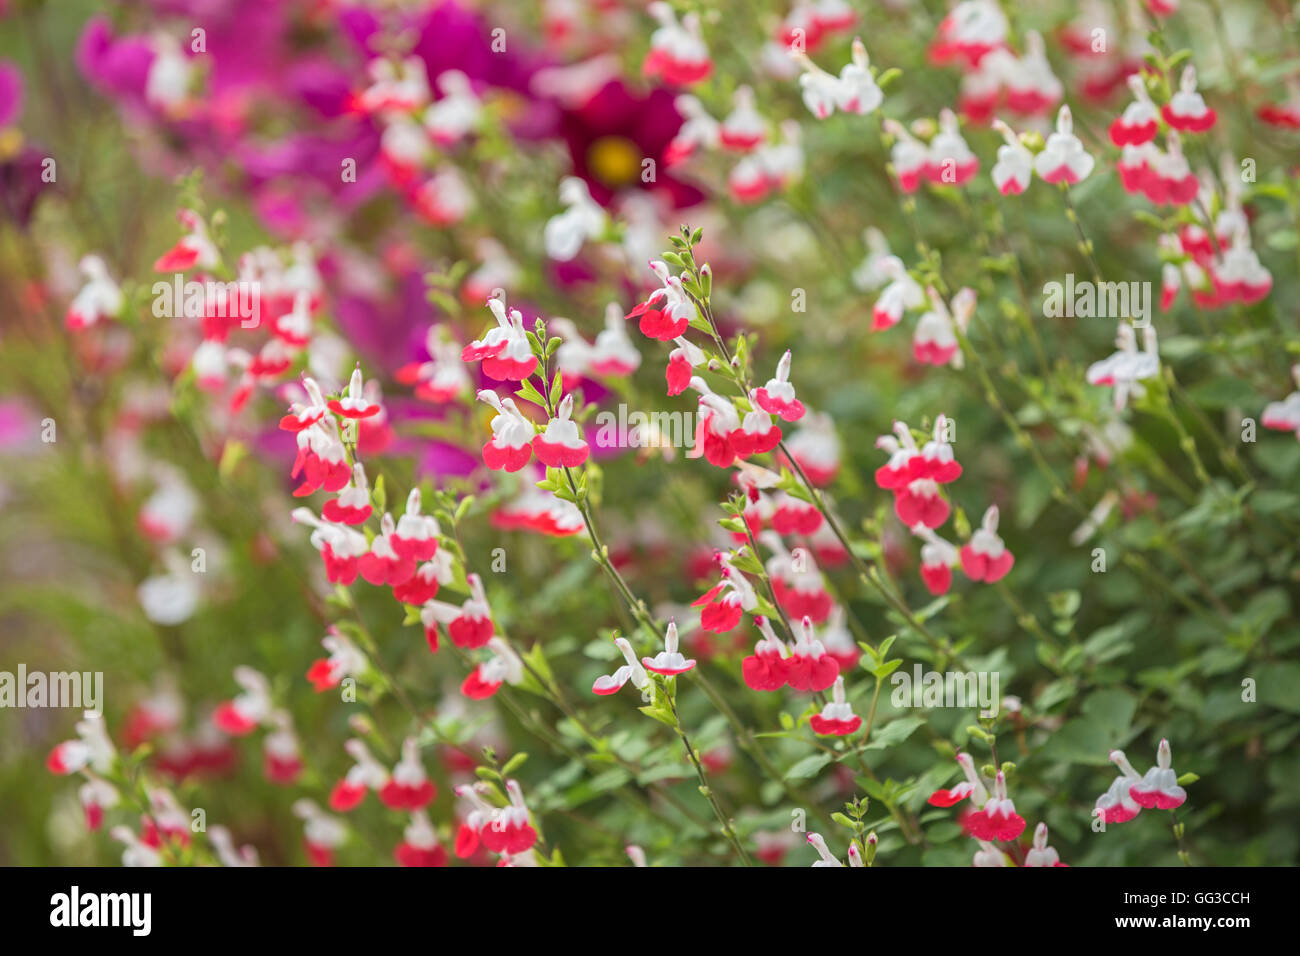 Red and white Salvia flower. Stock Photo